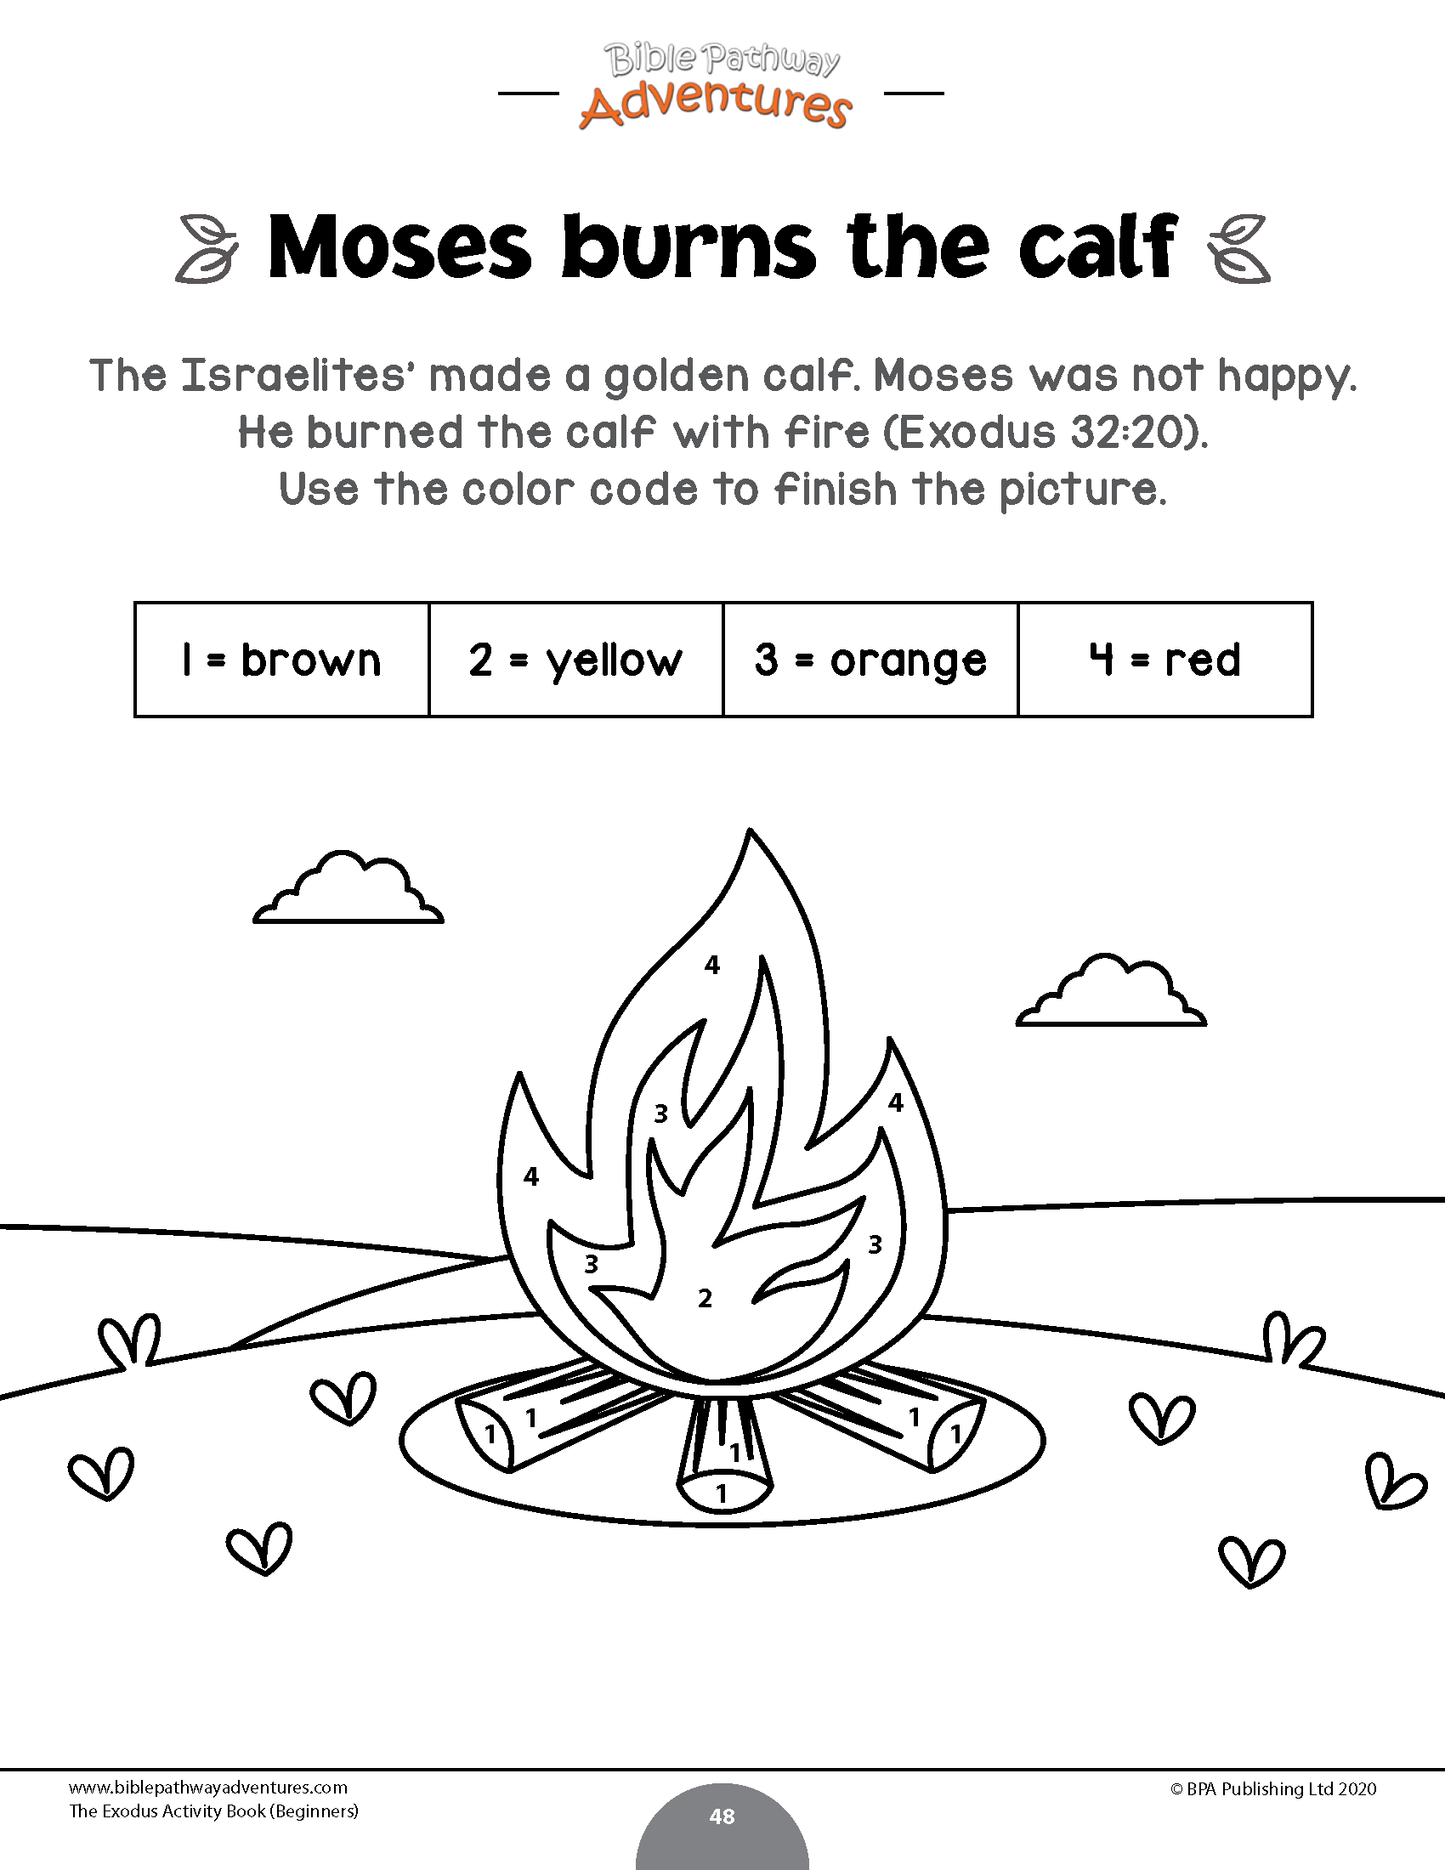 The Exodus Activity Book for Beginners (PDF)